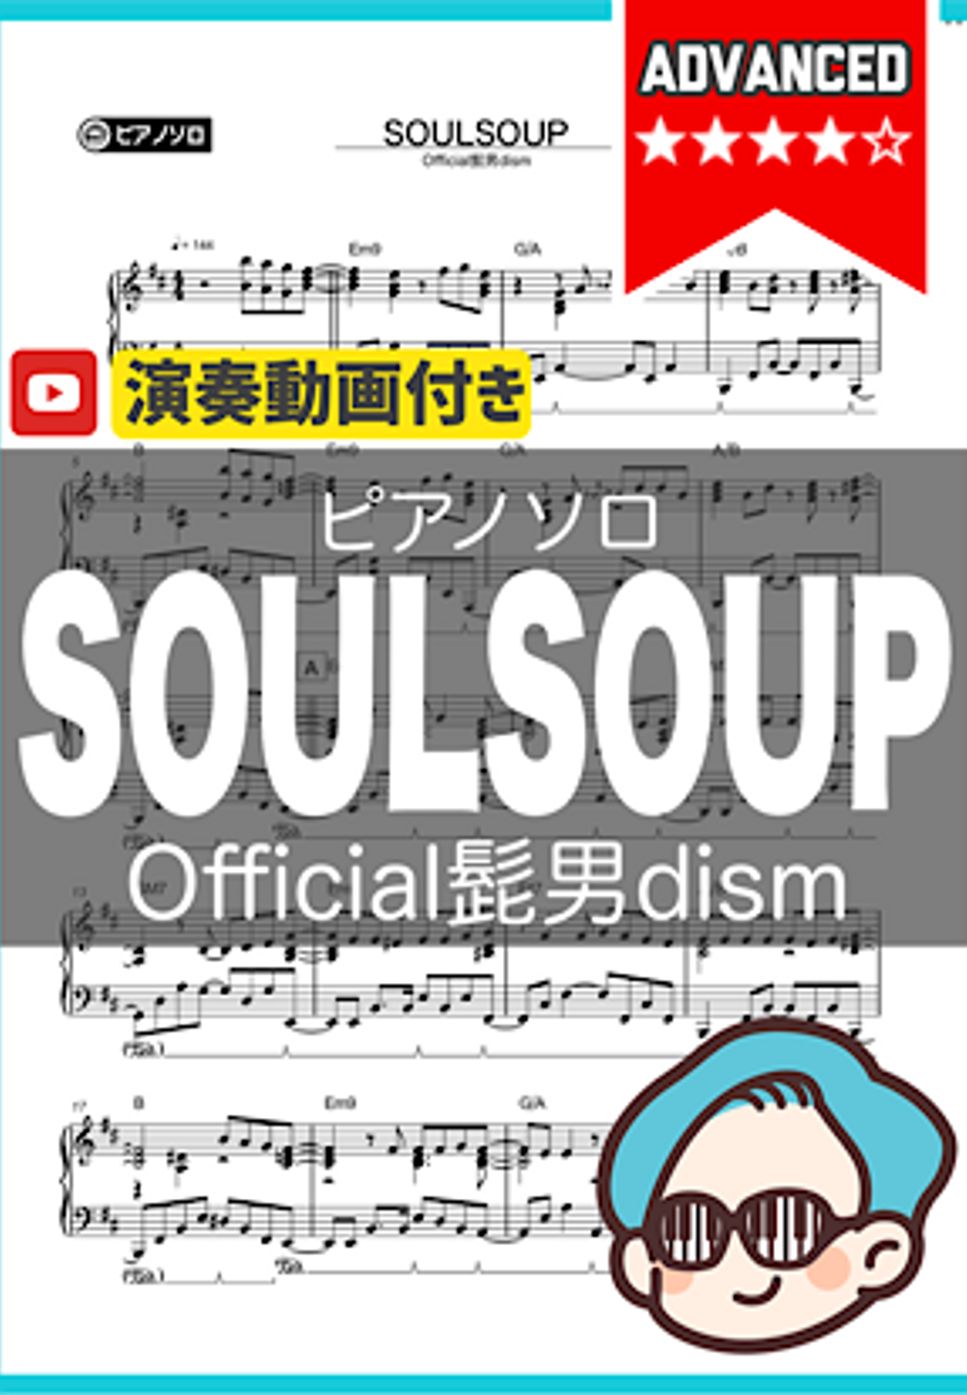 Official髭男dism - SOULSOUP by シータピアノ